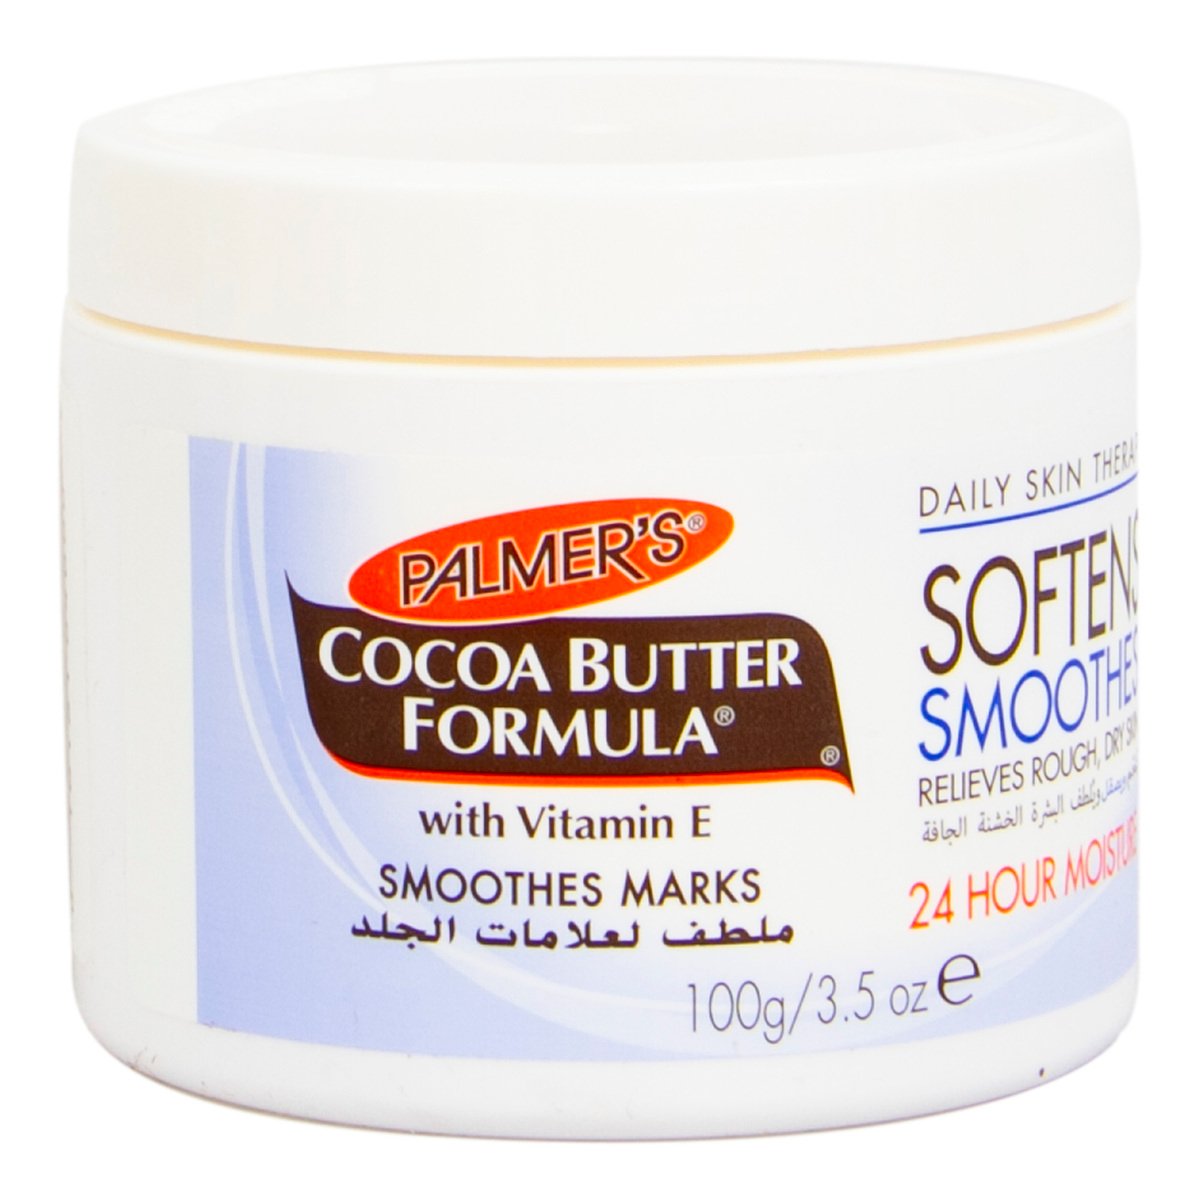 Palmer's Smoothes Marks Cocoa Butter Formula 100 g